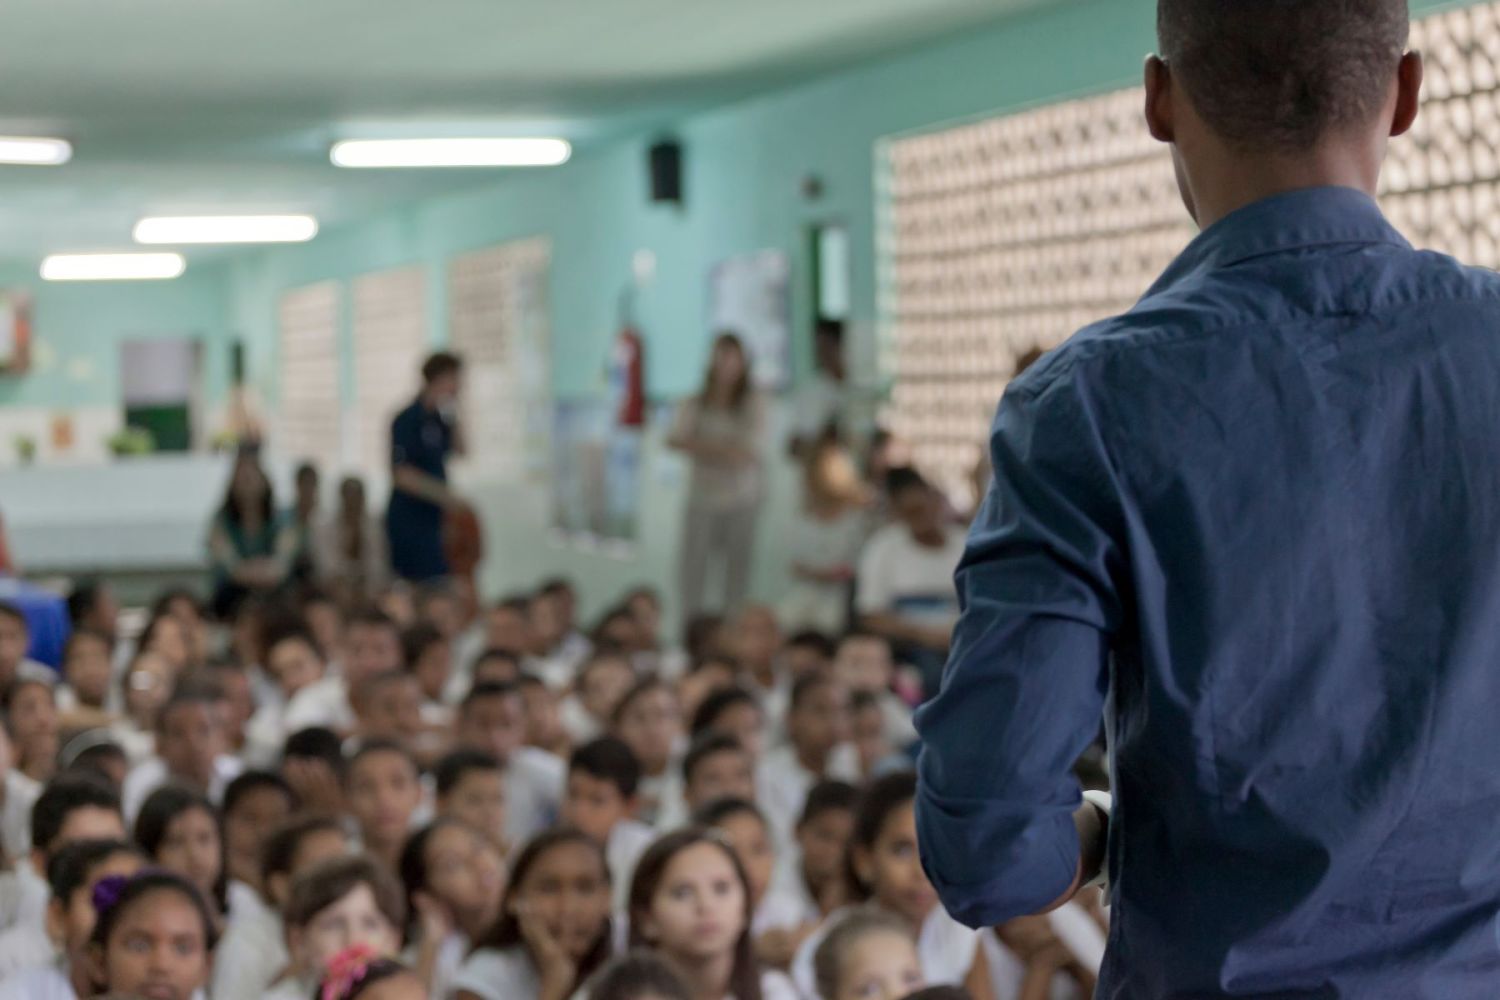 Male teacher standing in front of a classroom full of young students in Brazil